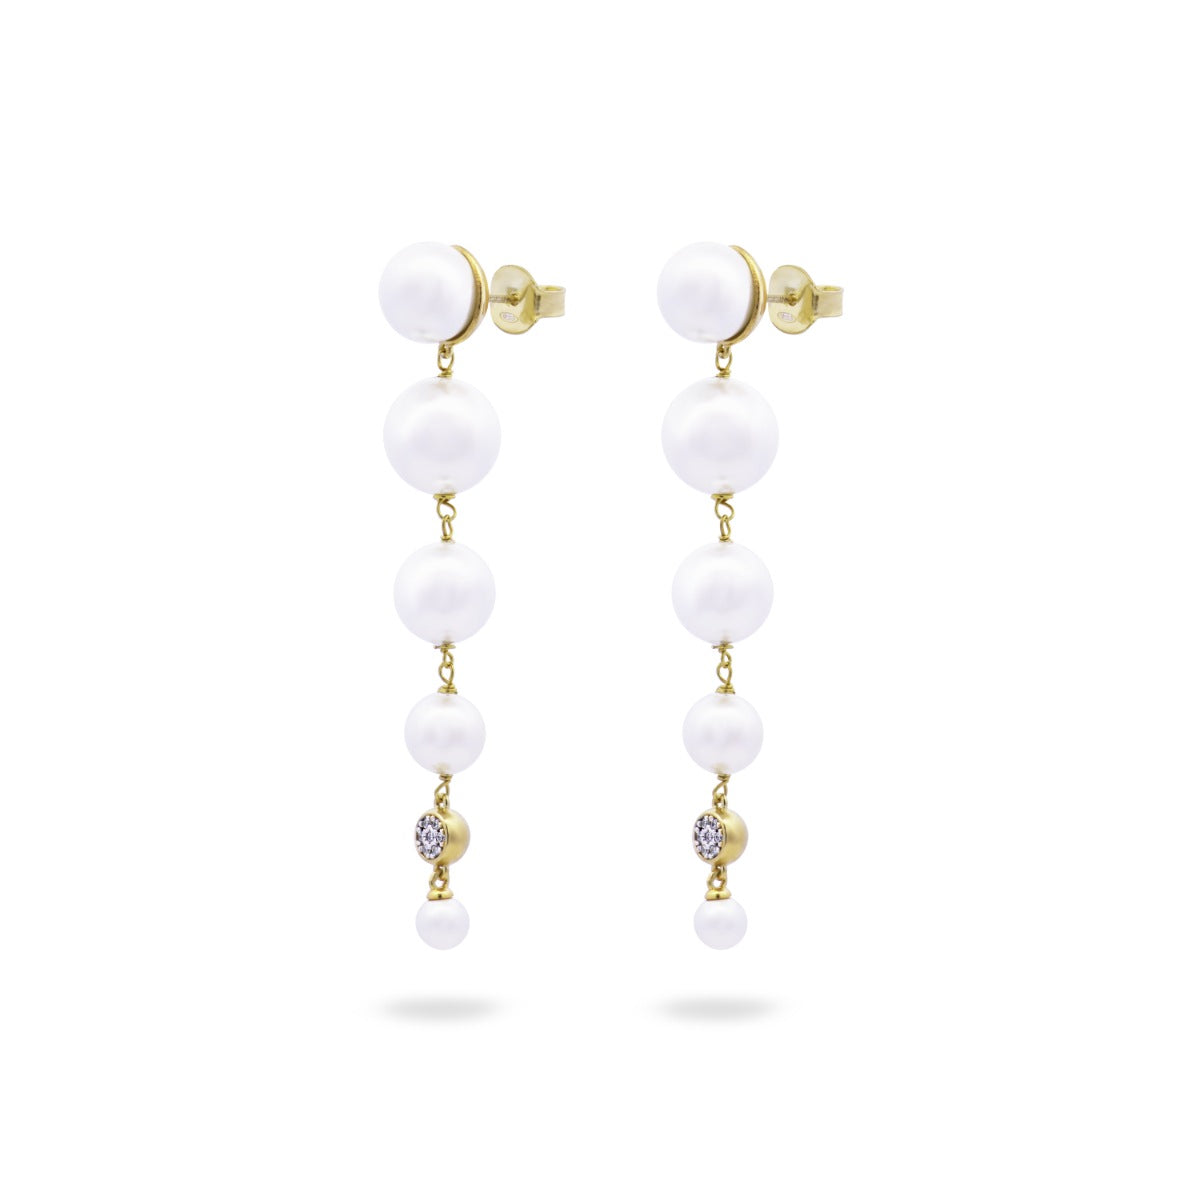 Pair of earrings with a cascade of pearl - WHITESIDE